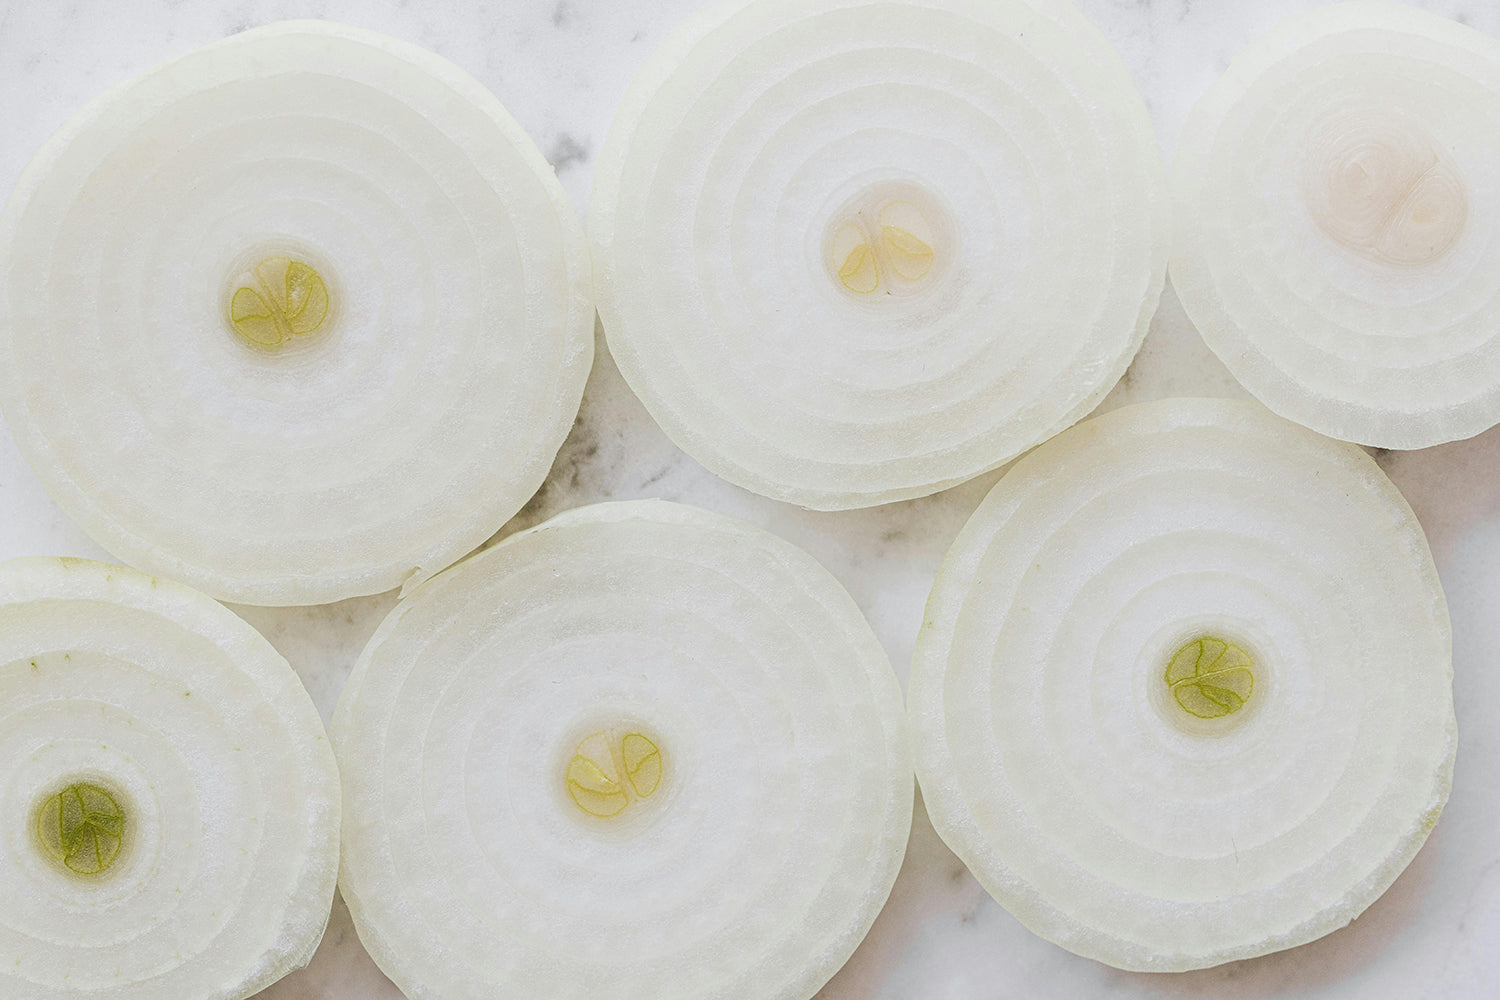 Can Dogs Eat Onions? What to Know About Onion Toxicity in Dogs